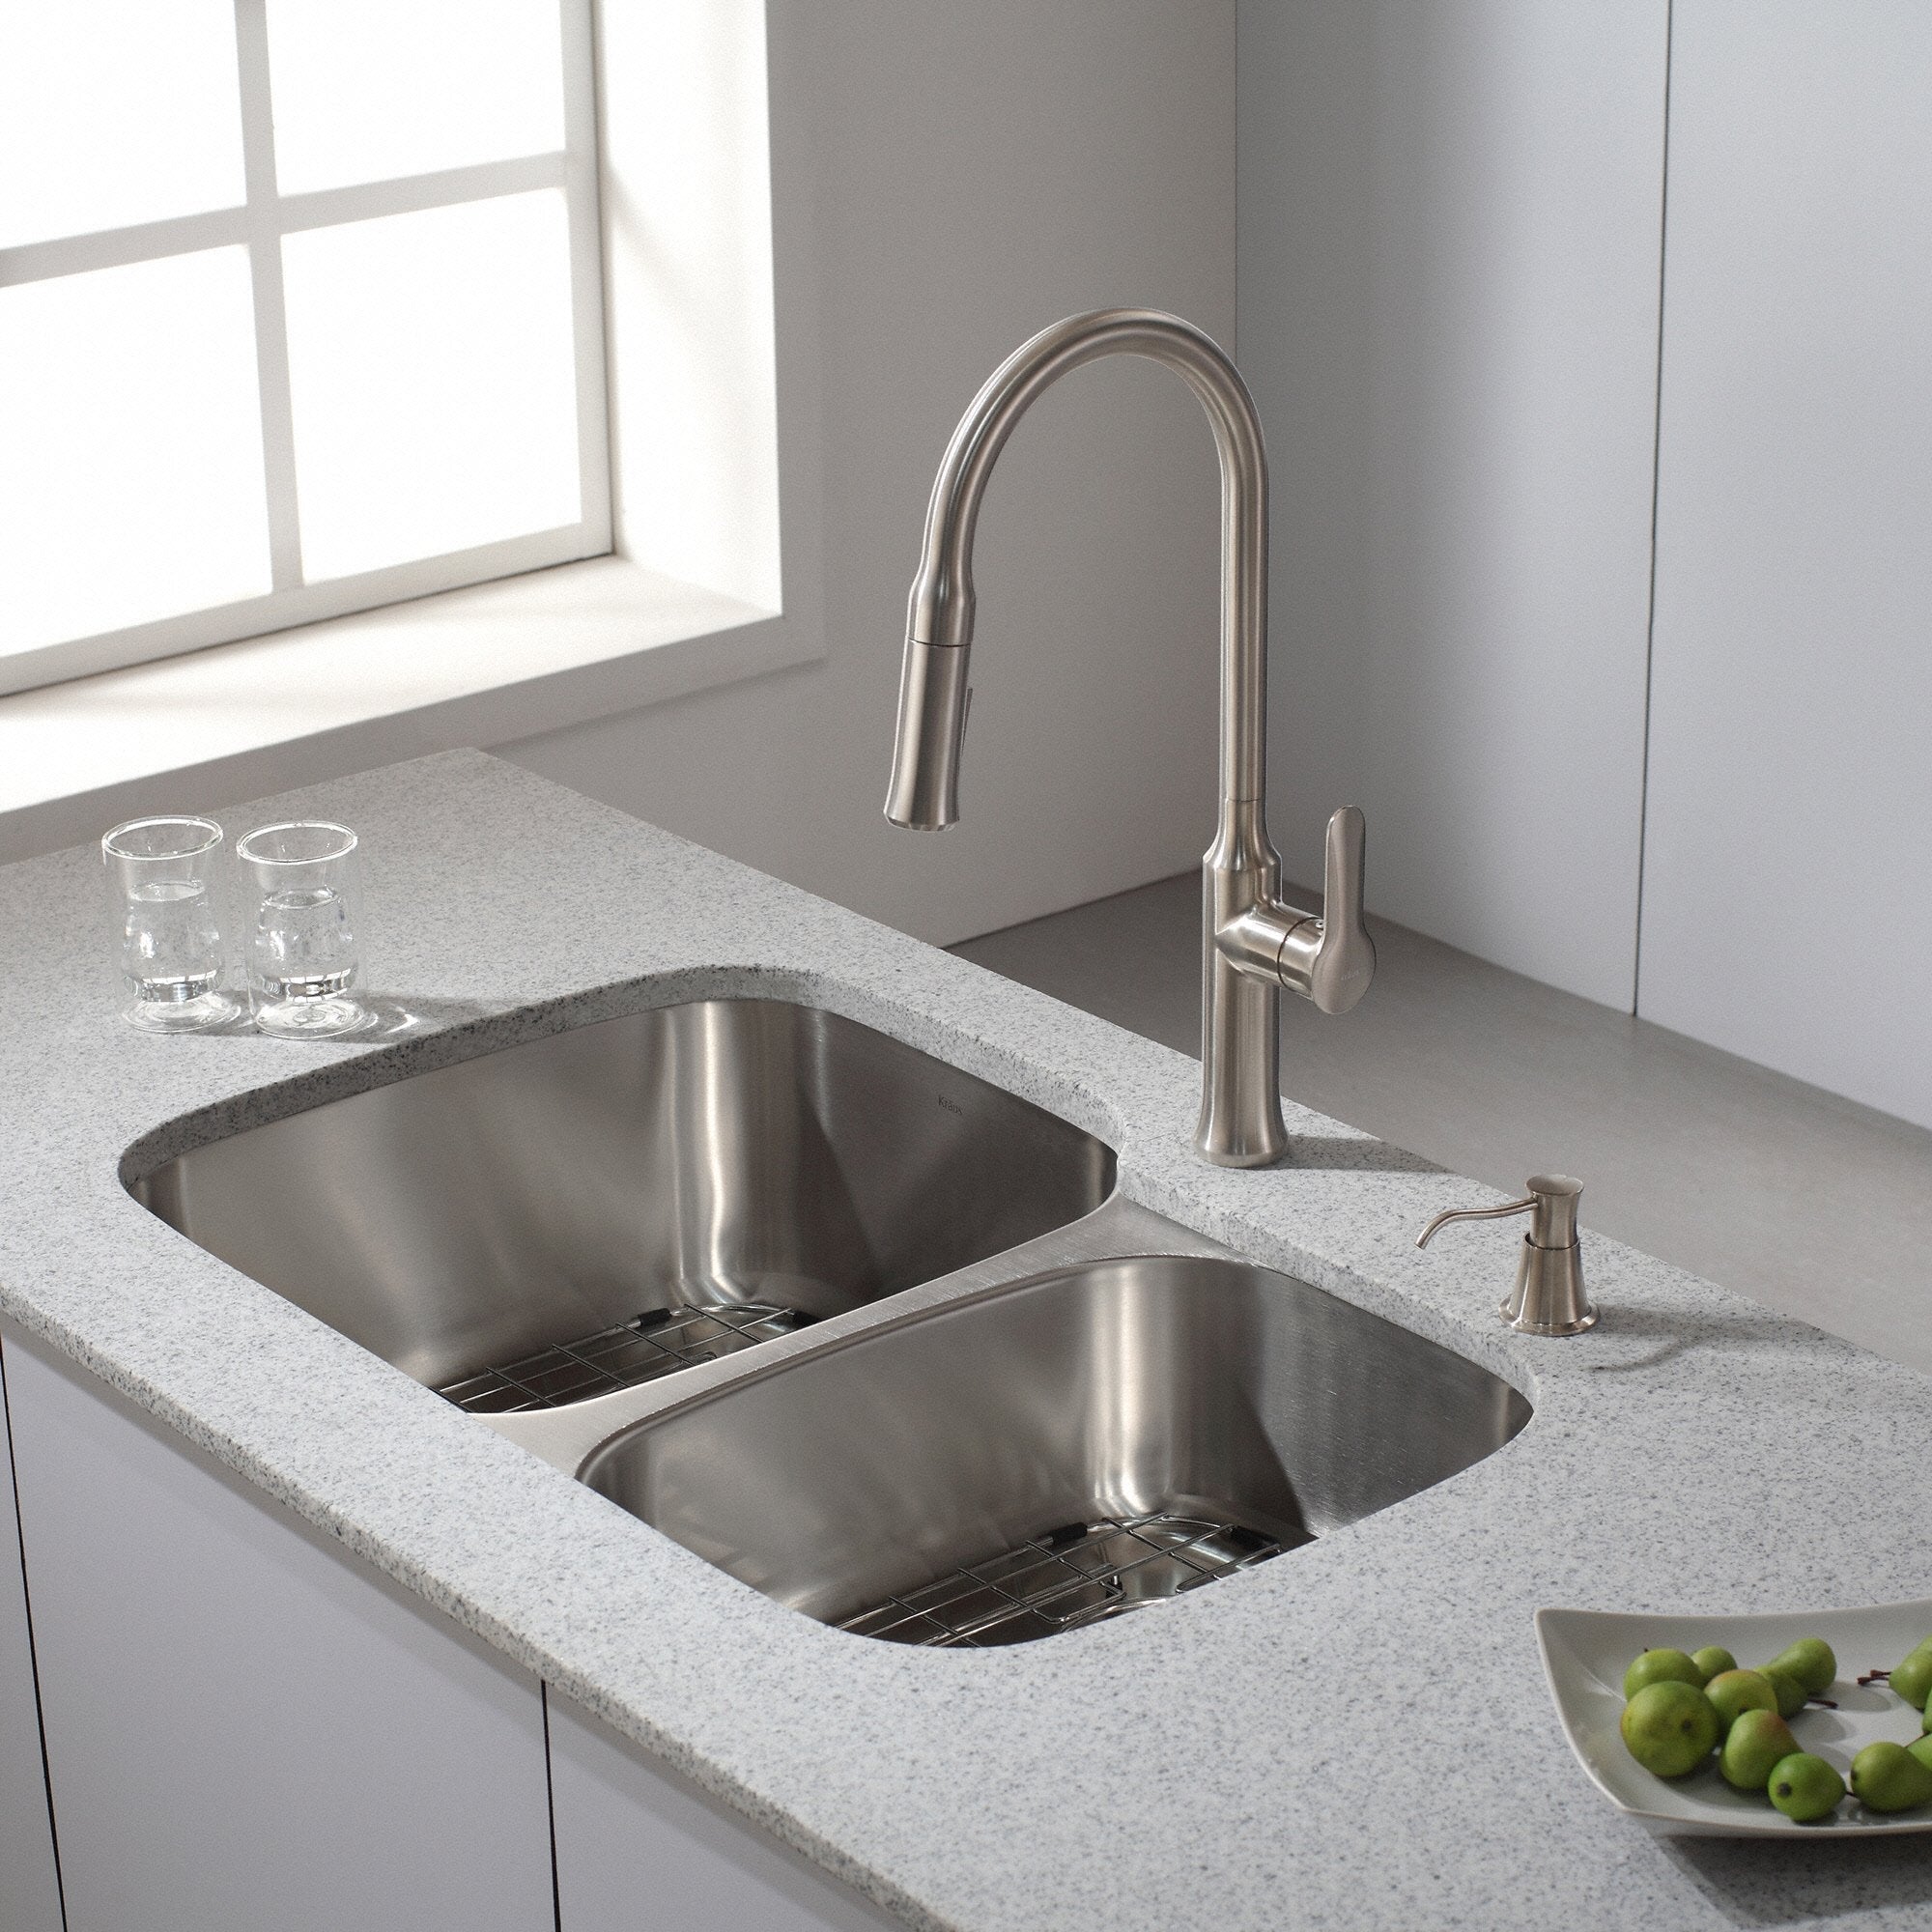 KRAUS Nola Single Lever Pull-down Kitchen Faucet in Stainless Steel KPF-1630SS | DirectSinks